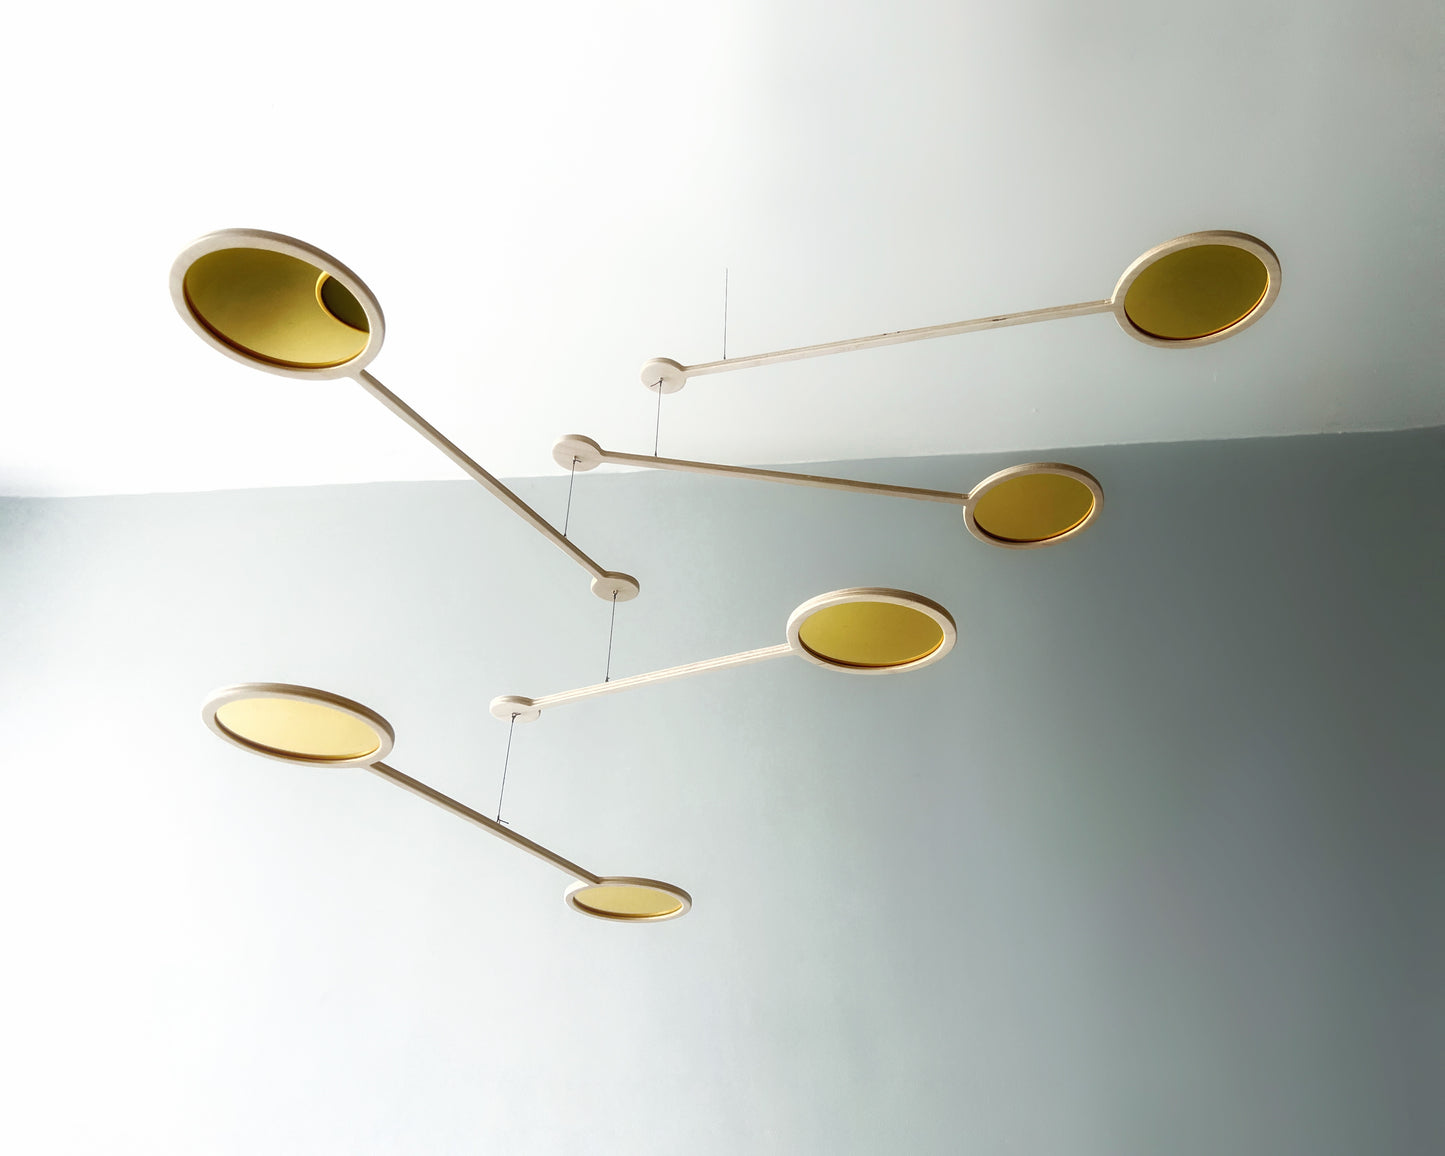 Orbit Mobile - The Illuminist - Gold Brass mirror  Mobiles Kinetic Mobile Kinetic Art  Kinetic Sculpture Crib Mobile Baby Mobile Nursery Mobile Mobile Art Mid Century Art  Mid Century modern Calder mobile mobiles for adults furniture and decor Hanging Art Mobile Art spinning mobile Modern Art Contemporary Art  Hanging mobile Calder-inspired. 